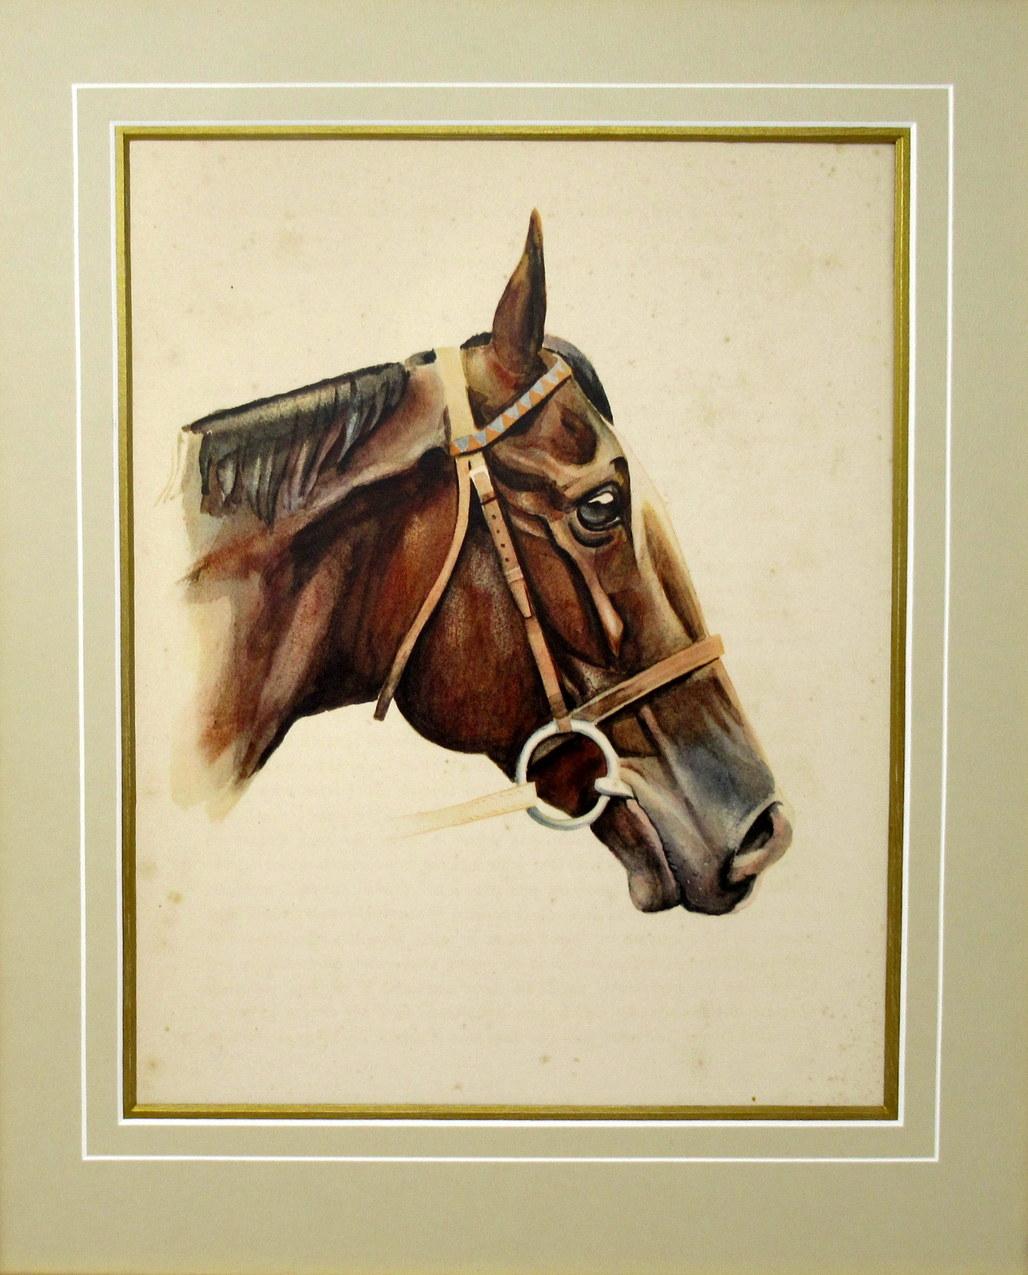 An exceptionally fine quality framed color print on paper of French origin, depicting a French thoroughbred racehorse named TOURBILLON.

Complete with printed eight-page booklet, see images. 

Professionally re-mounted on artists card within a